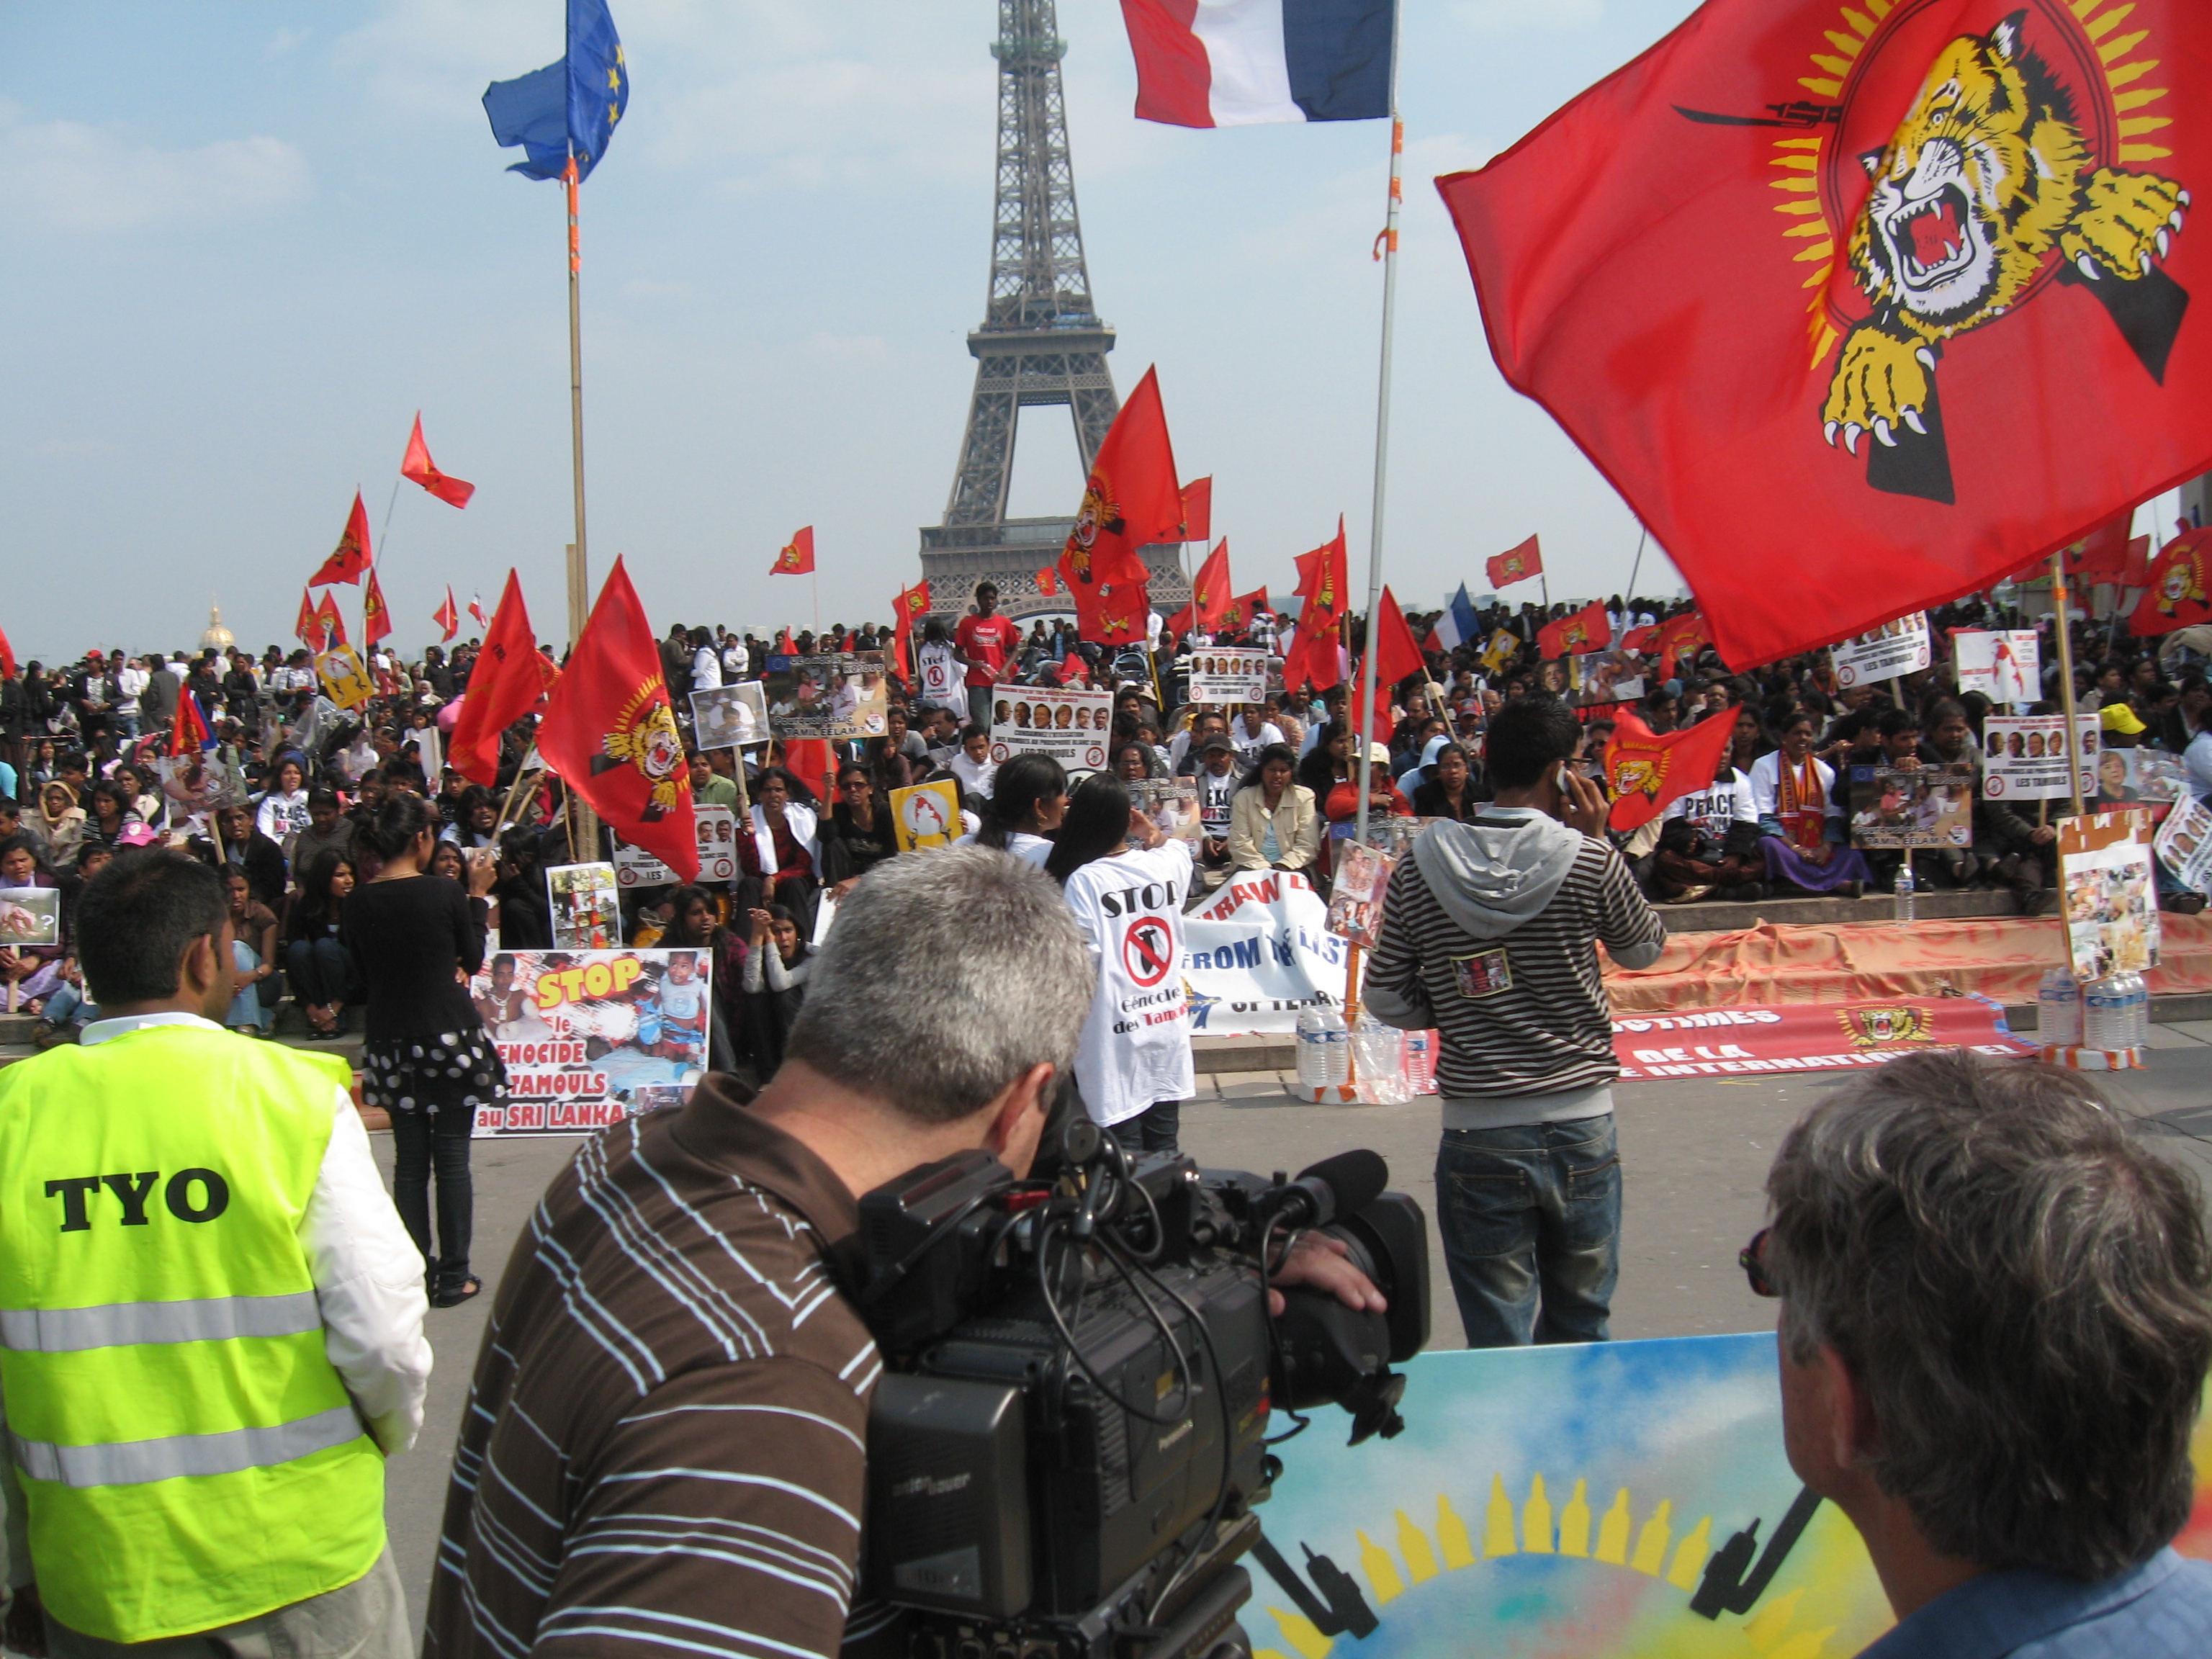 So do you have experience shooting a Sri Lanka protest in Paris? You're hired.